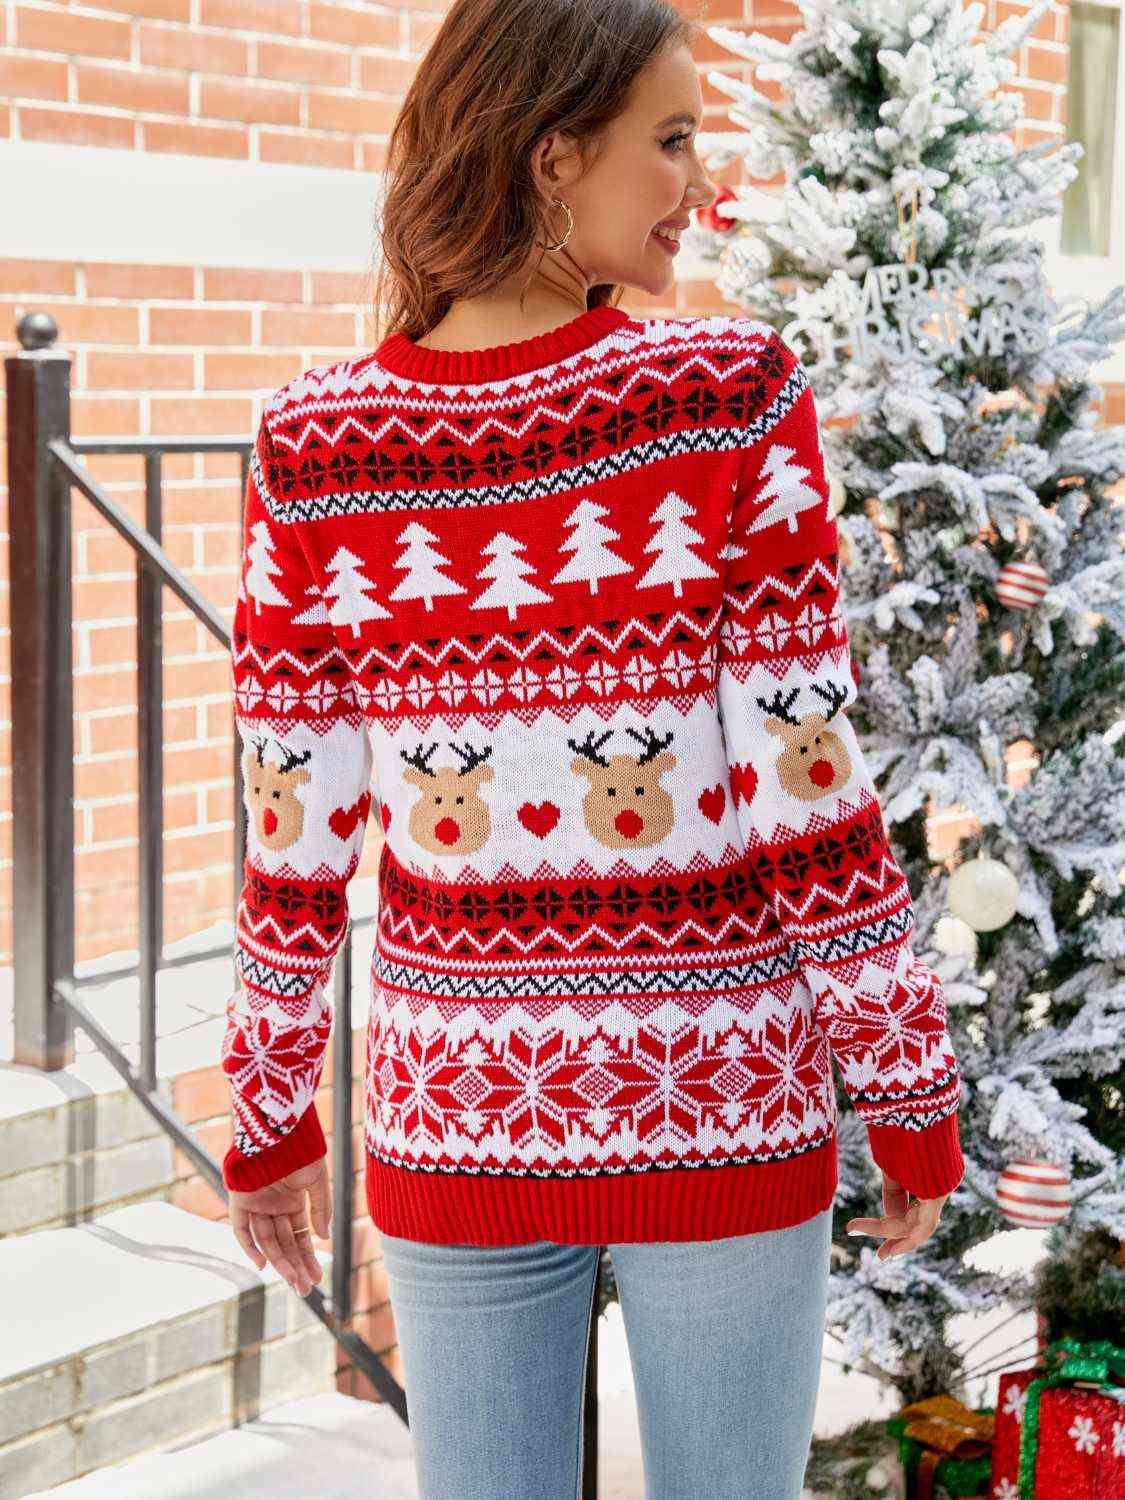 Christmas Round Neck Sweater - Kawaii Stop - Acrylic knitwear, Casual holiday wear, Christmas, Christmas outfit, Christmas sweater, No stretch sweater, Round neck sweater, Ship From Overseas, Yh